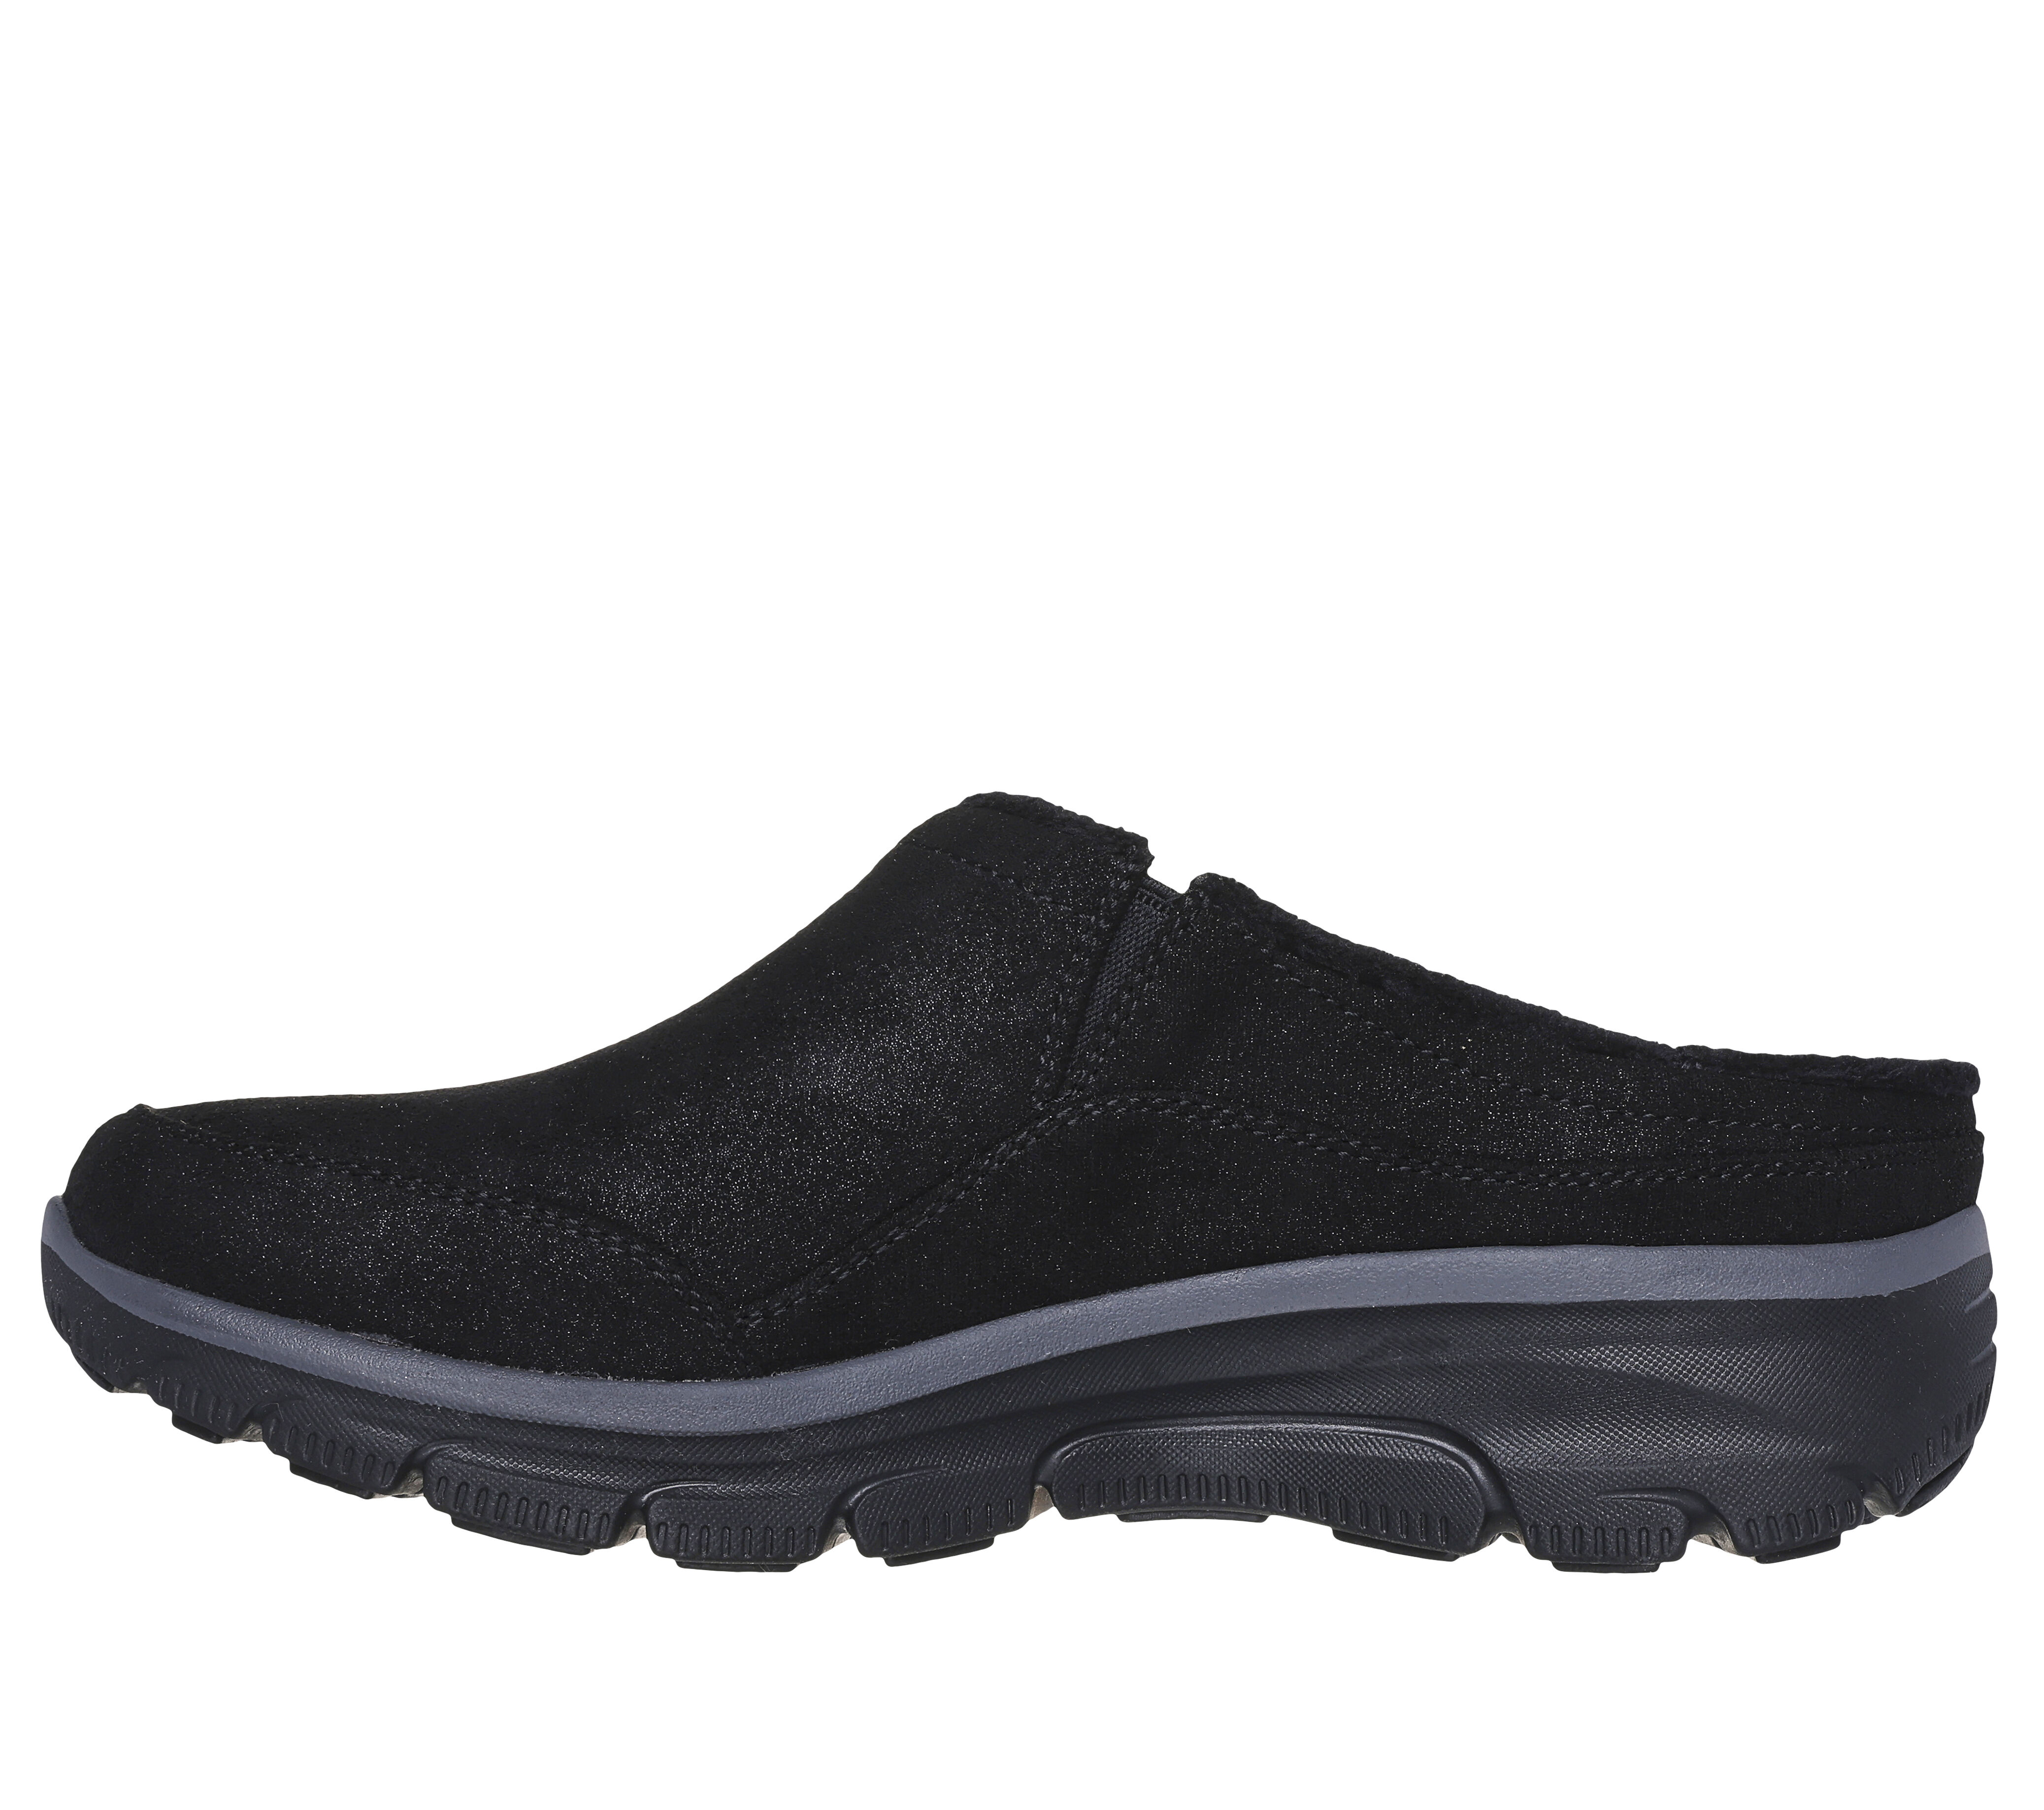 Martha Stewart x Skechers Relaxed Fit: Easy Going